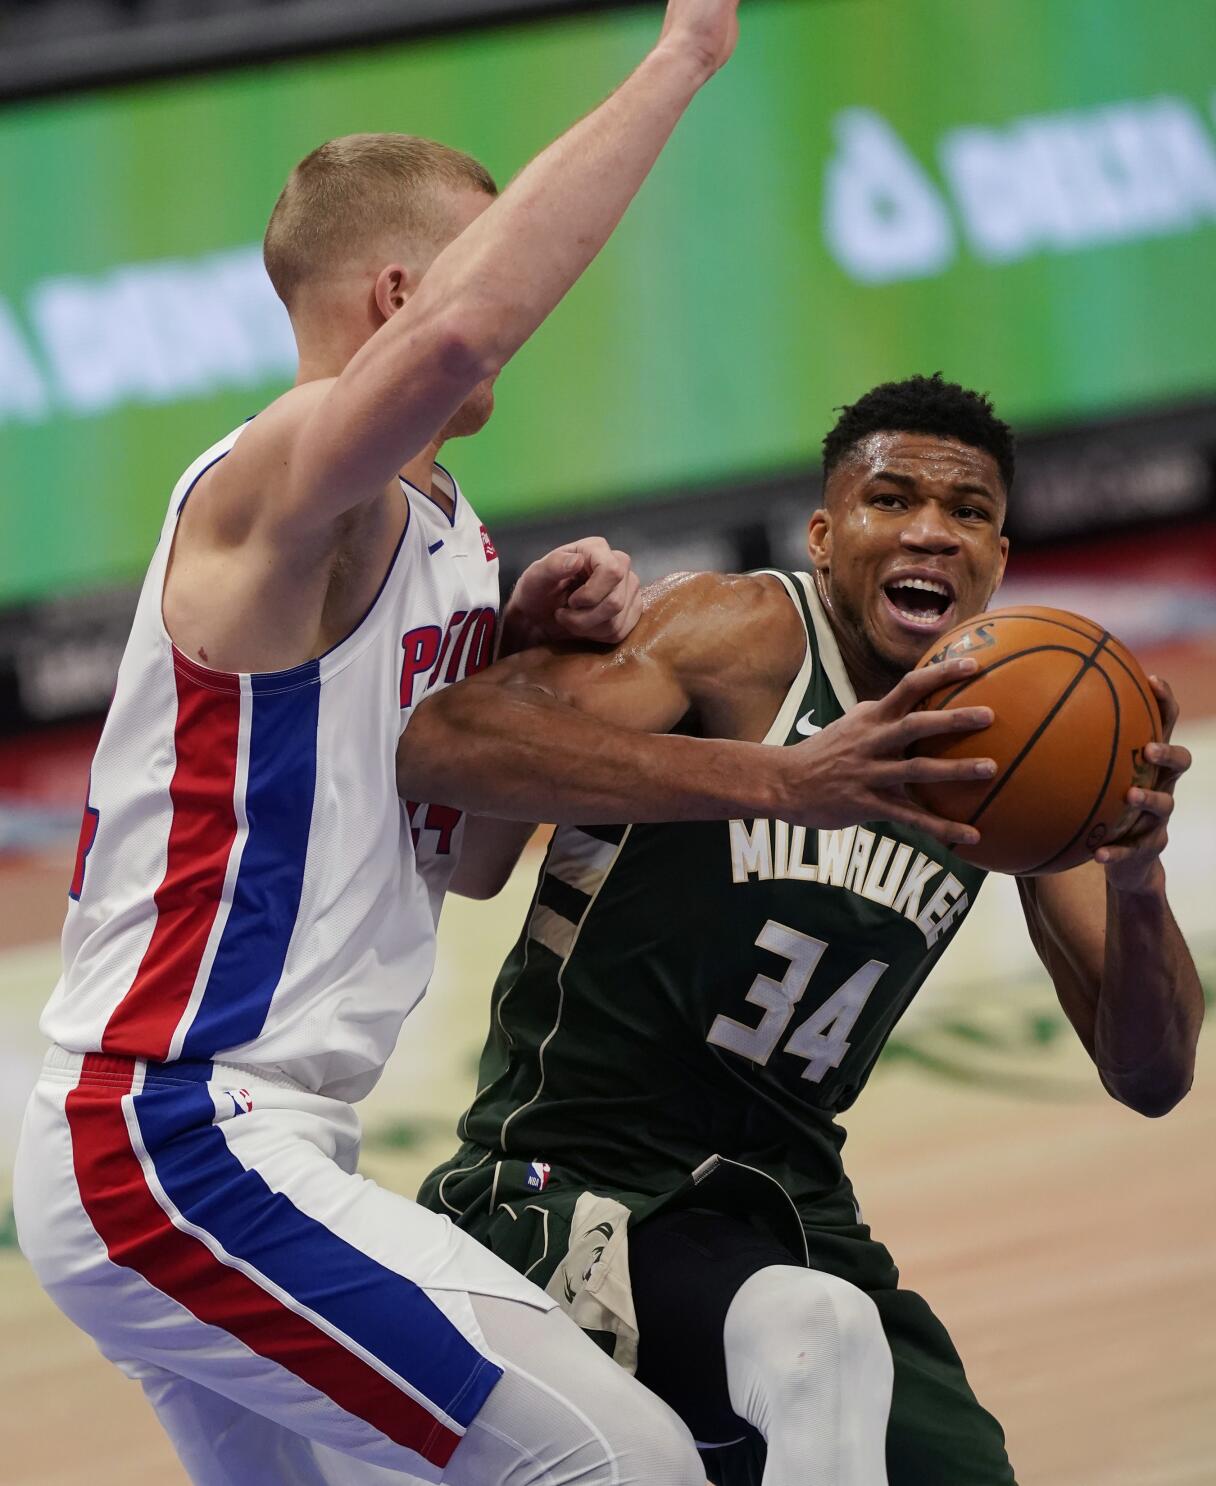 Photos from the Bucks' 110-101 win over the Pistons